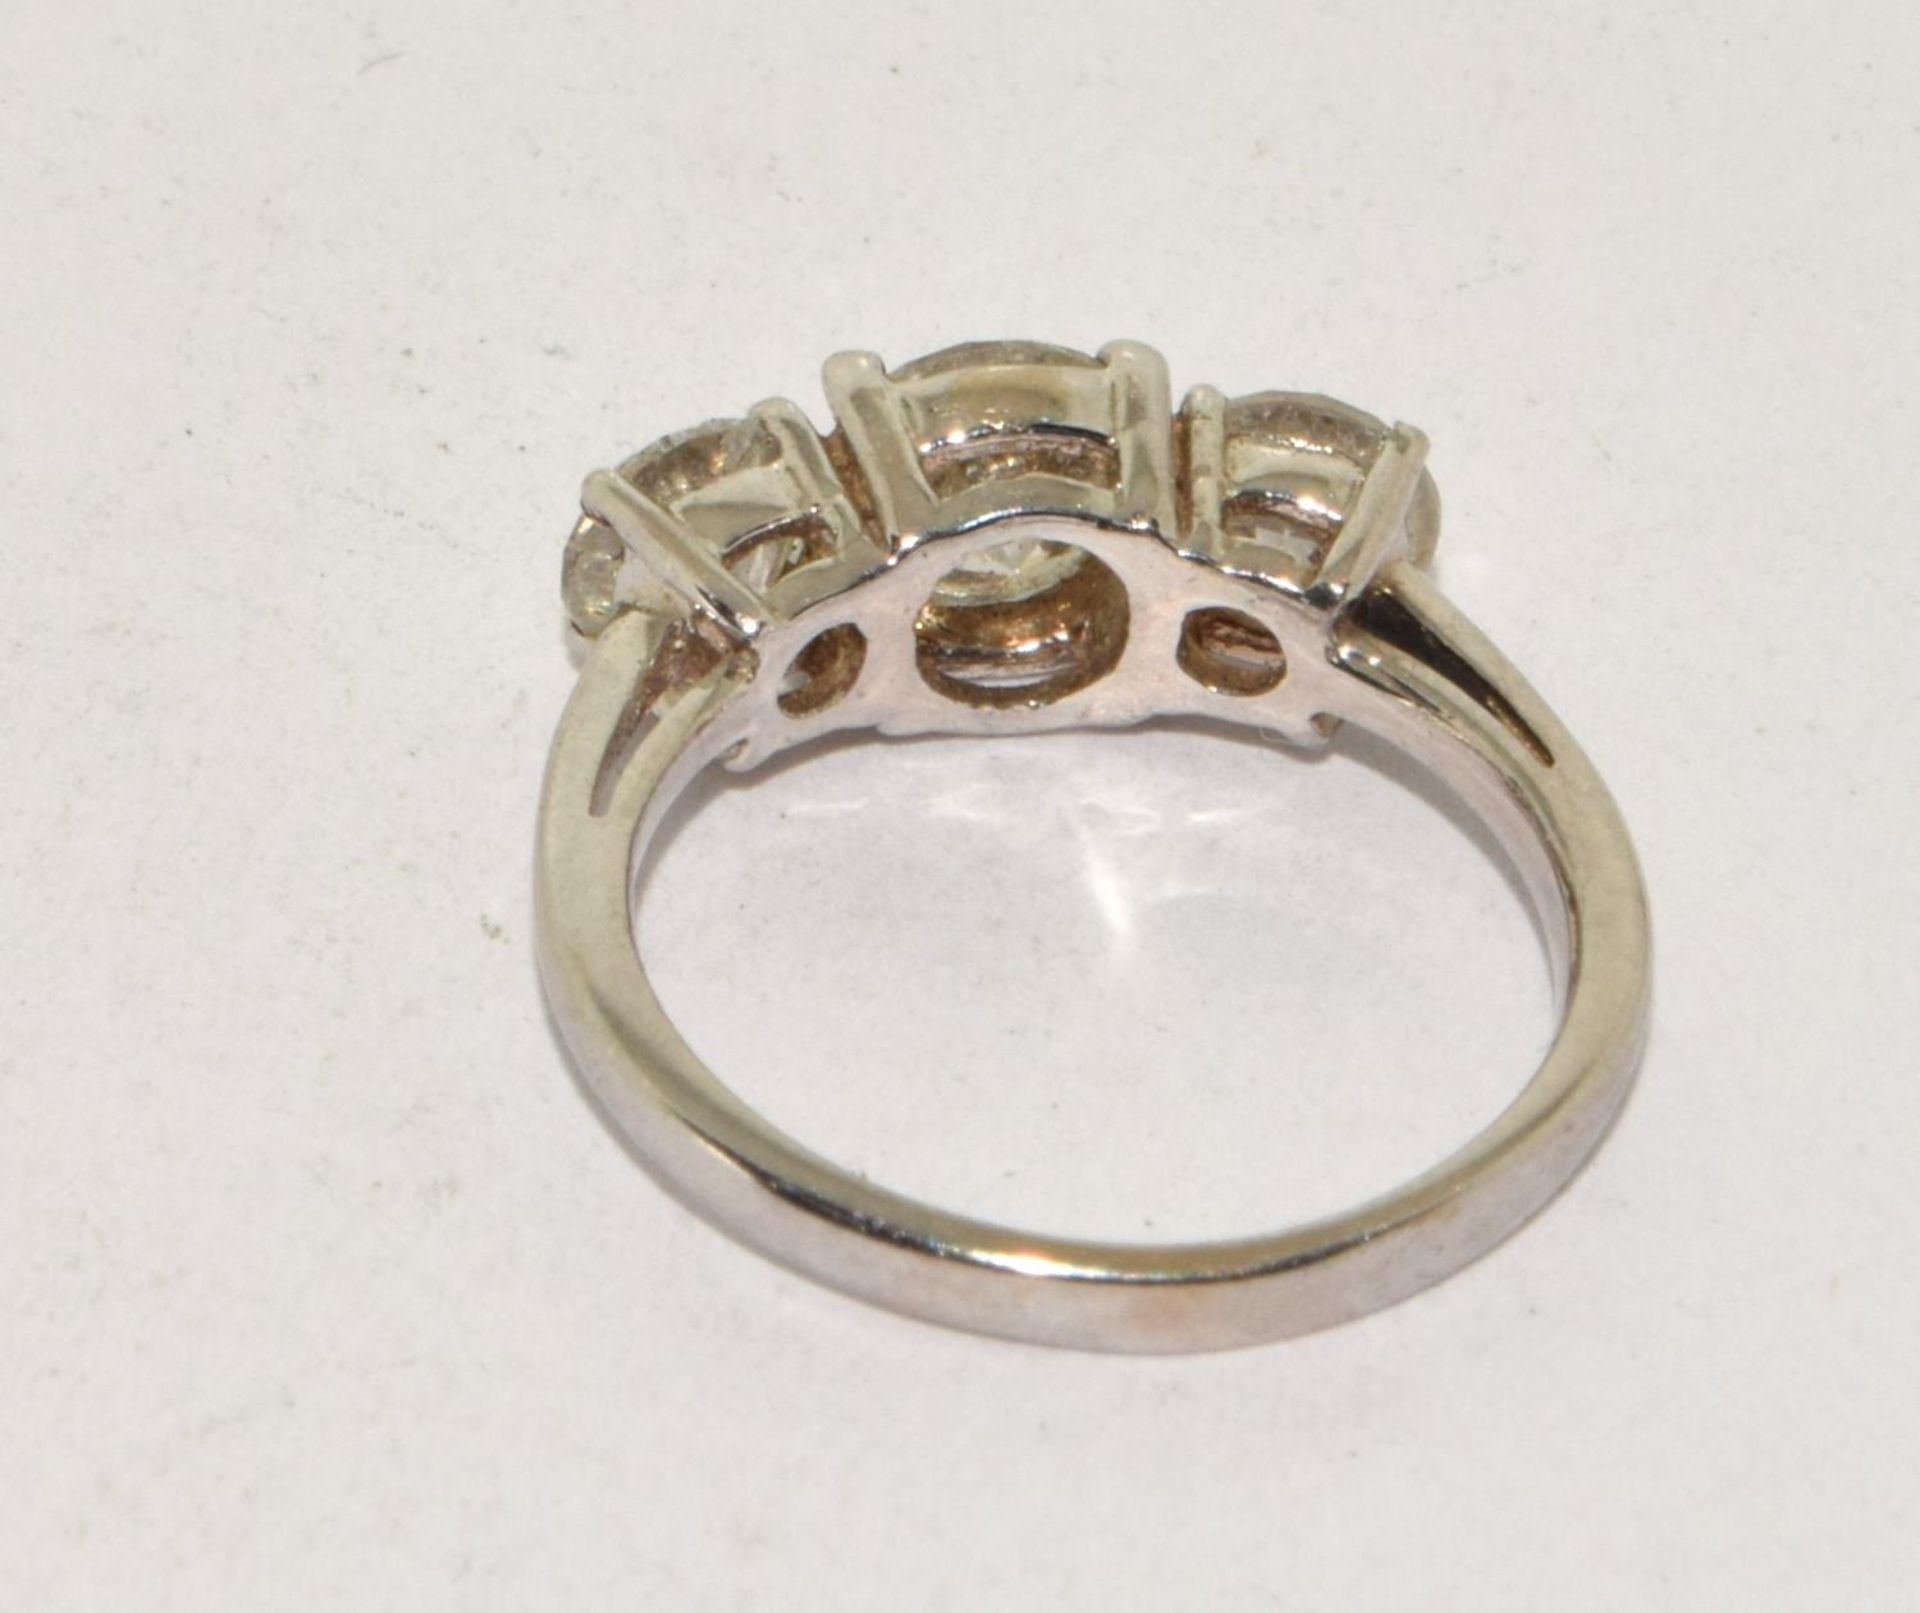 18ct white gold ladies 3 stone trilogy ring approx 2ct diamonds size K - Image 2 of 5